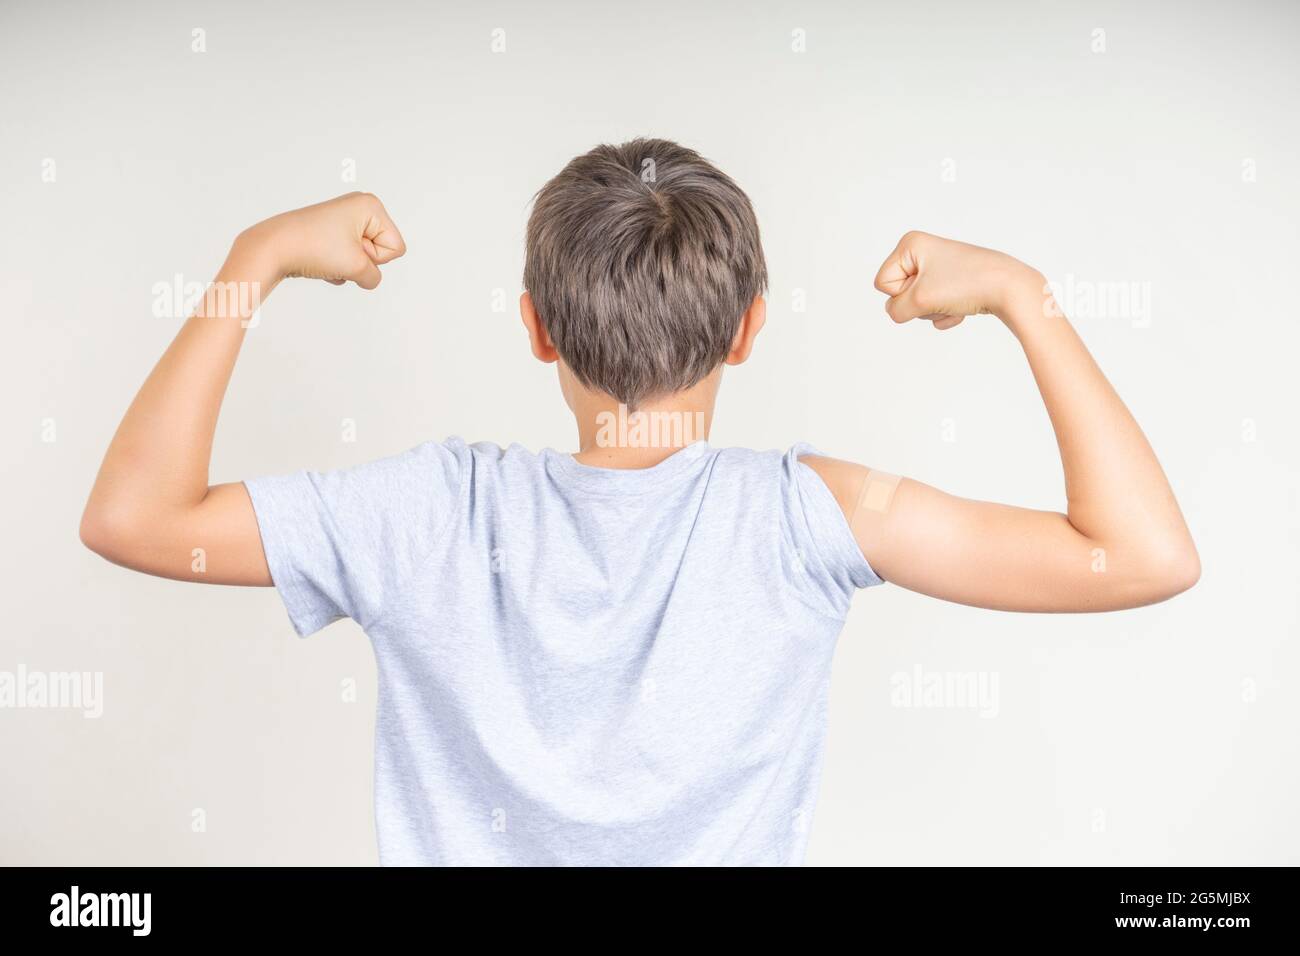 Teenage boy with bandage plaster on his arm makes fist and flexes her bicep after vaccination. Injection covid vaccine, healthcare for children Stock Photo